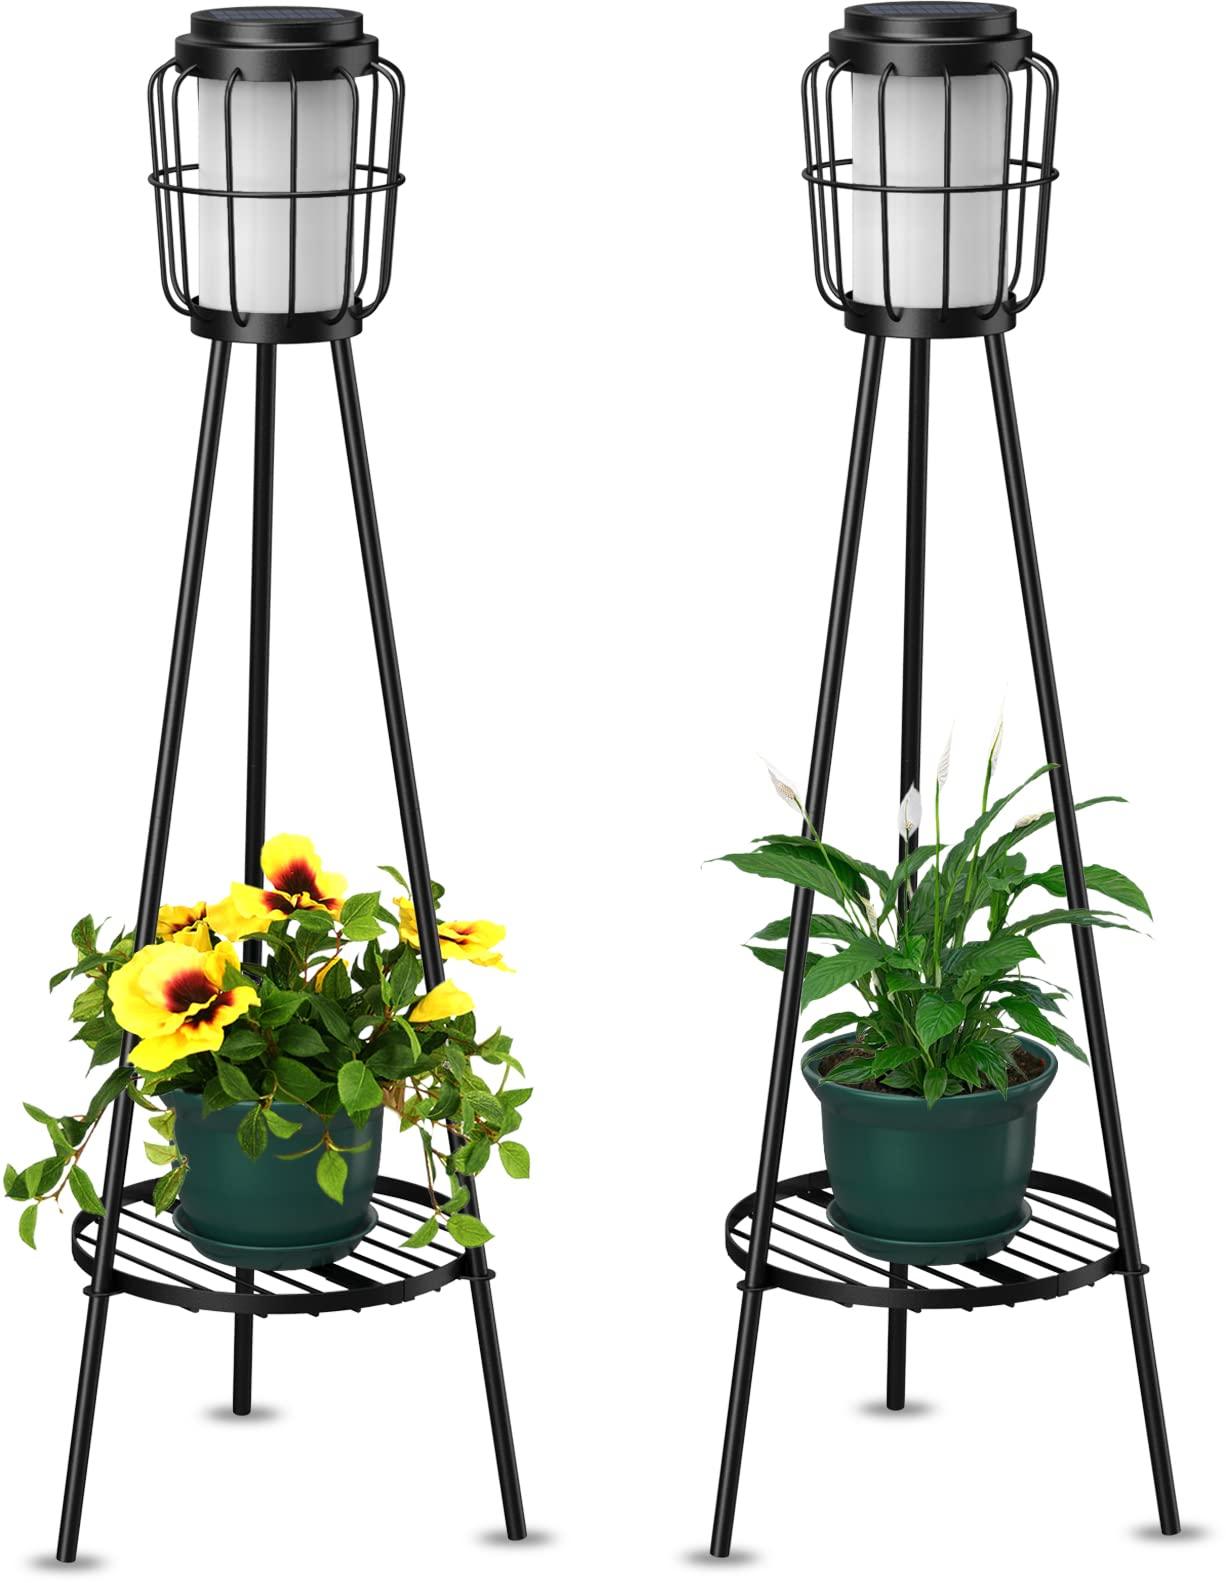 VISFLAIR Metal Solar Floor Lamps Outdoor with Plant Stand, 2 Pack Waterproof Solar Lantern Lights for Patio Deck Yard Garden Porch Decor (Black) - CookCave